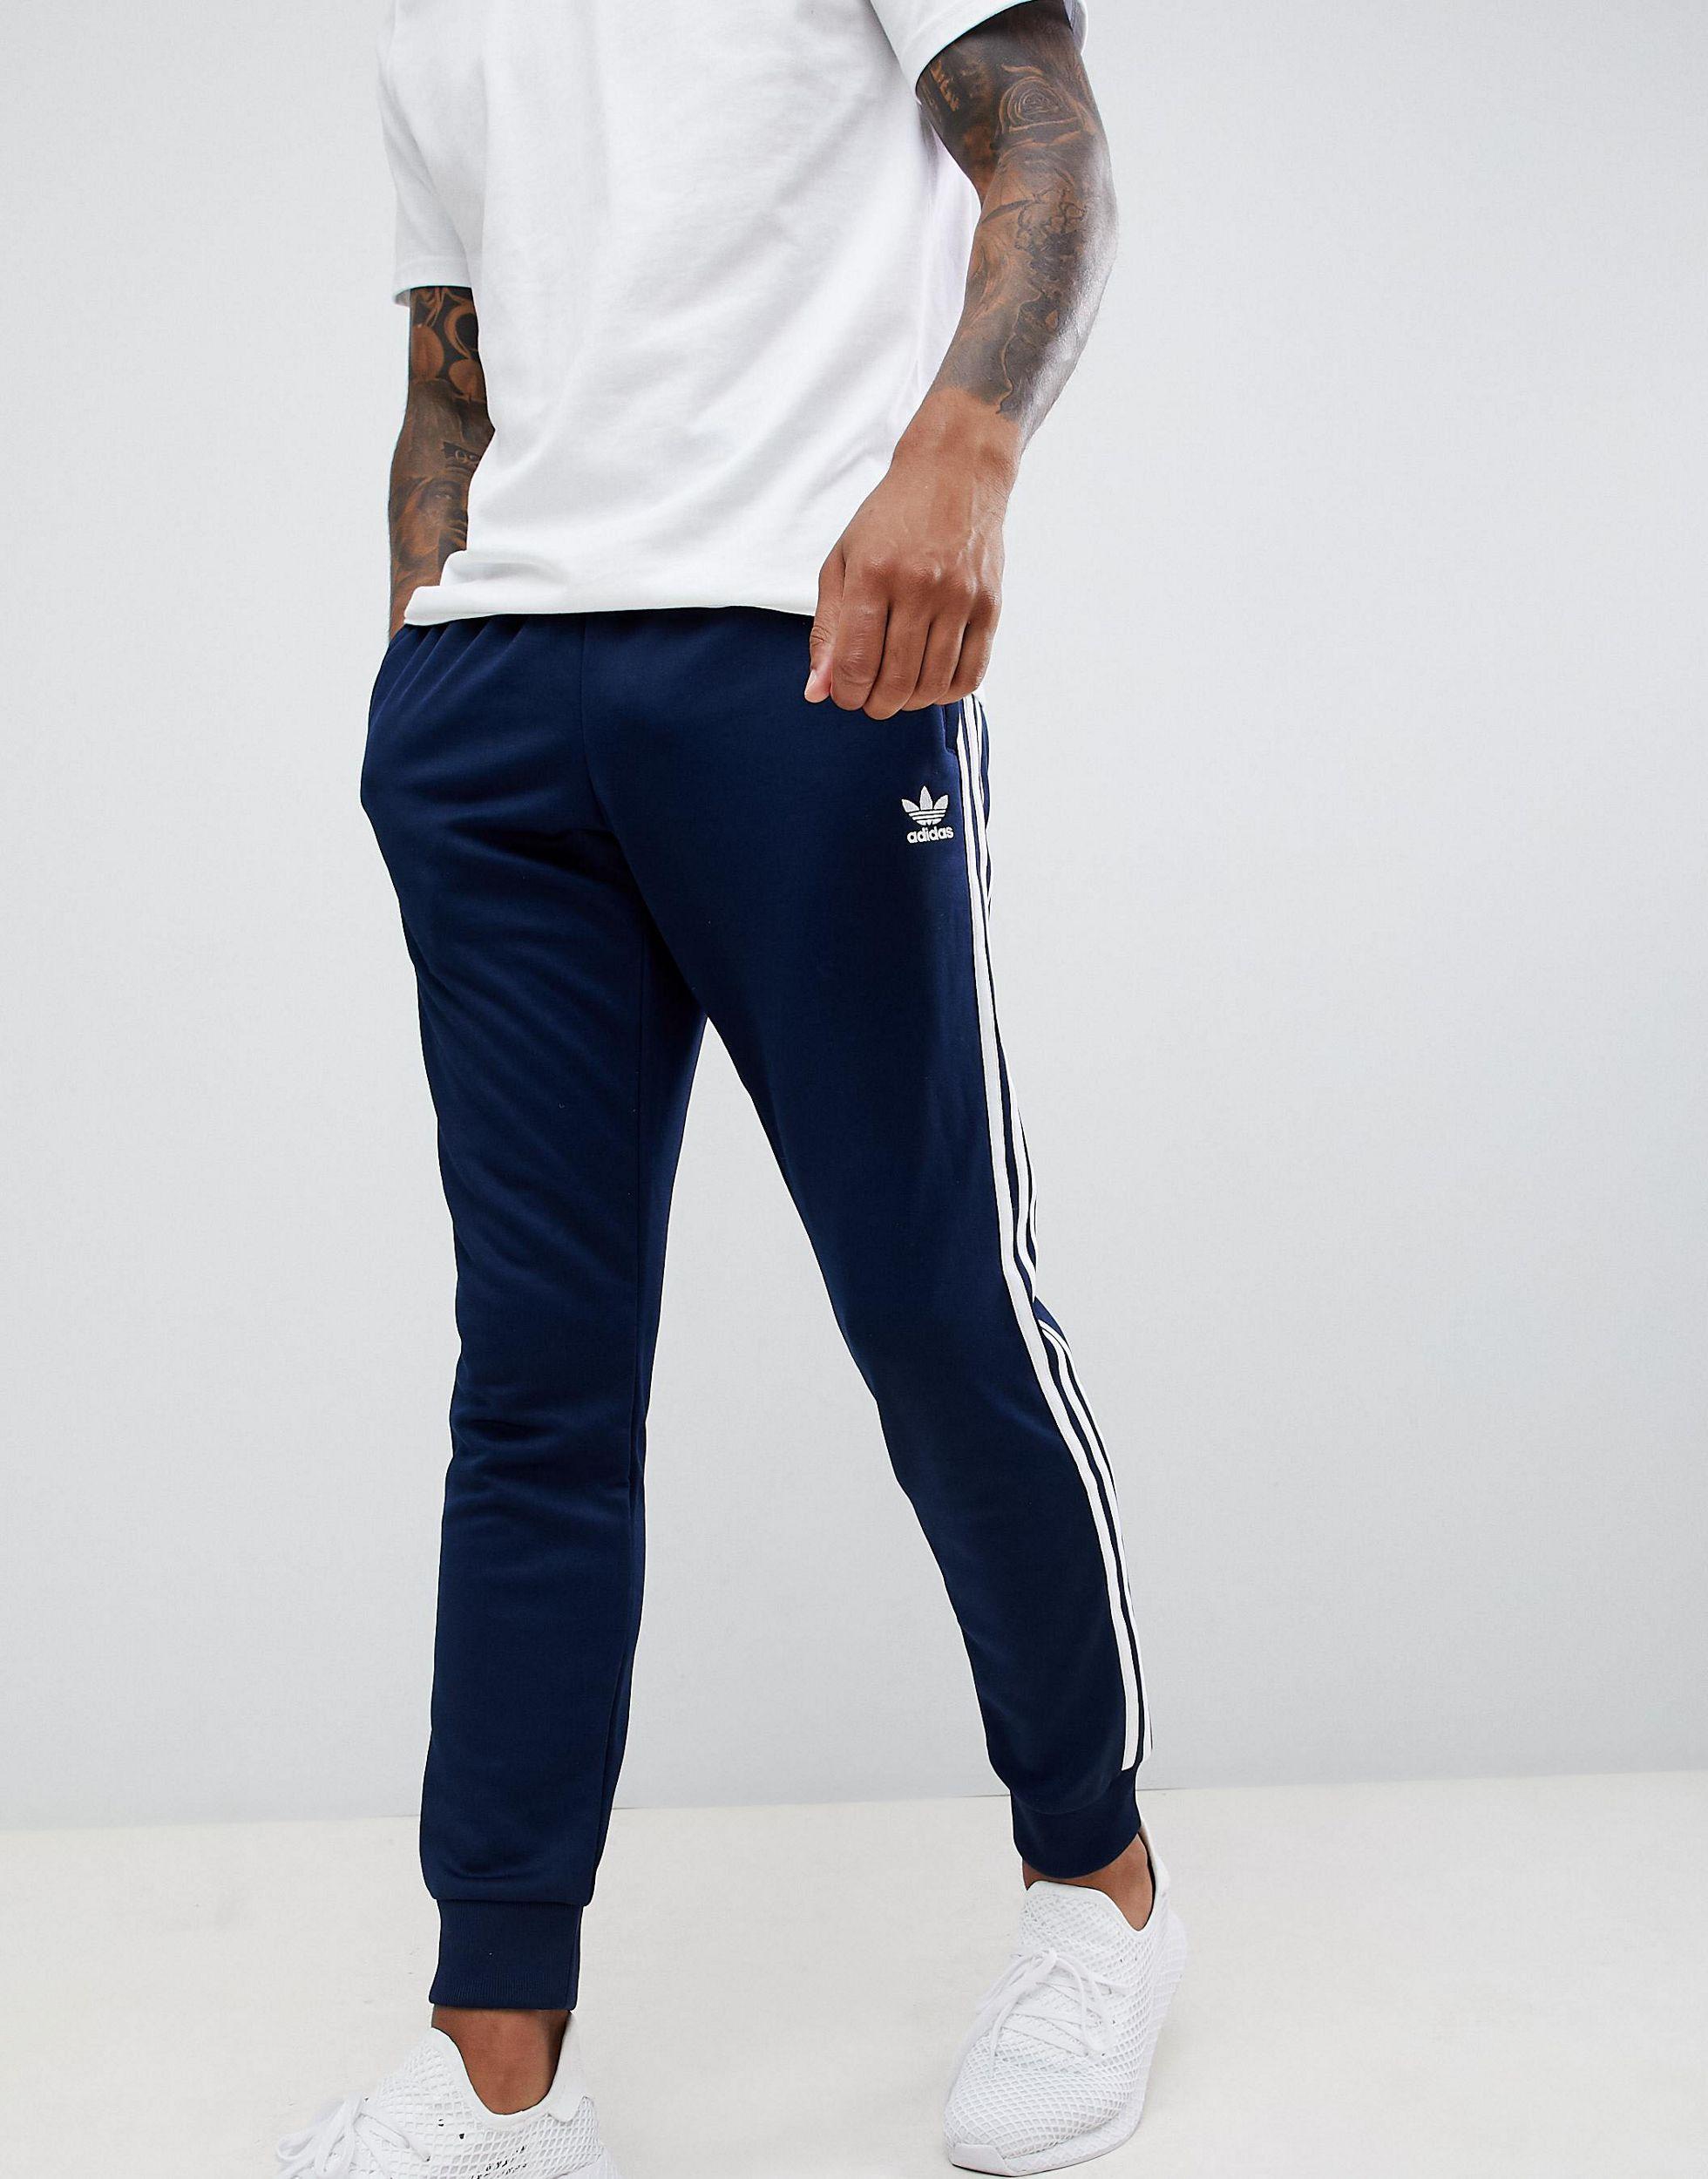 adidas Originals Three With Cuffed in Navy (Blue) for Men - Lyst